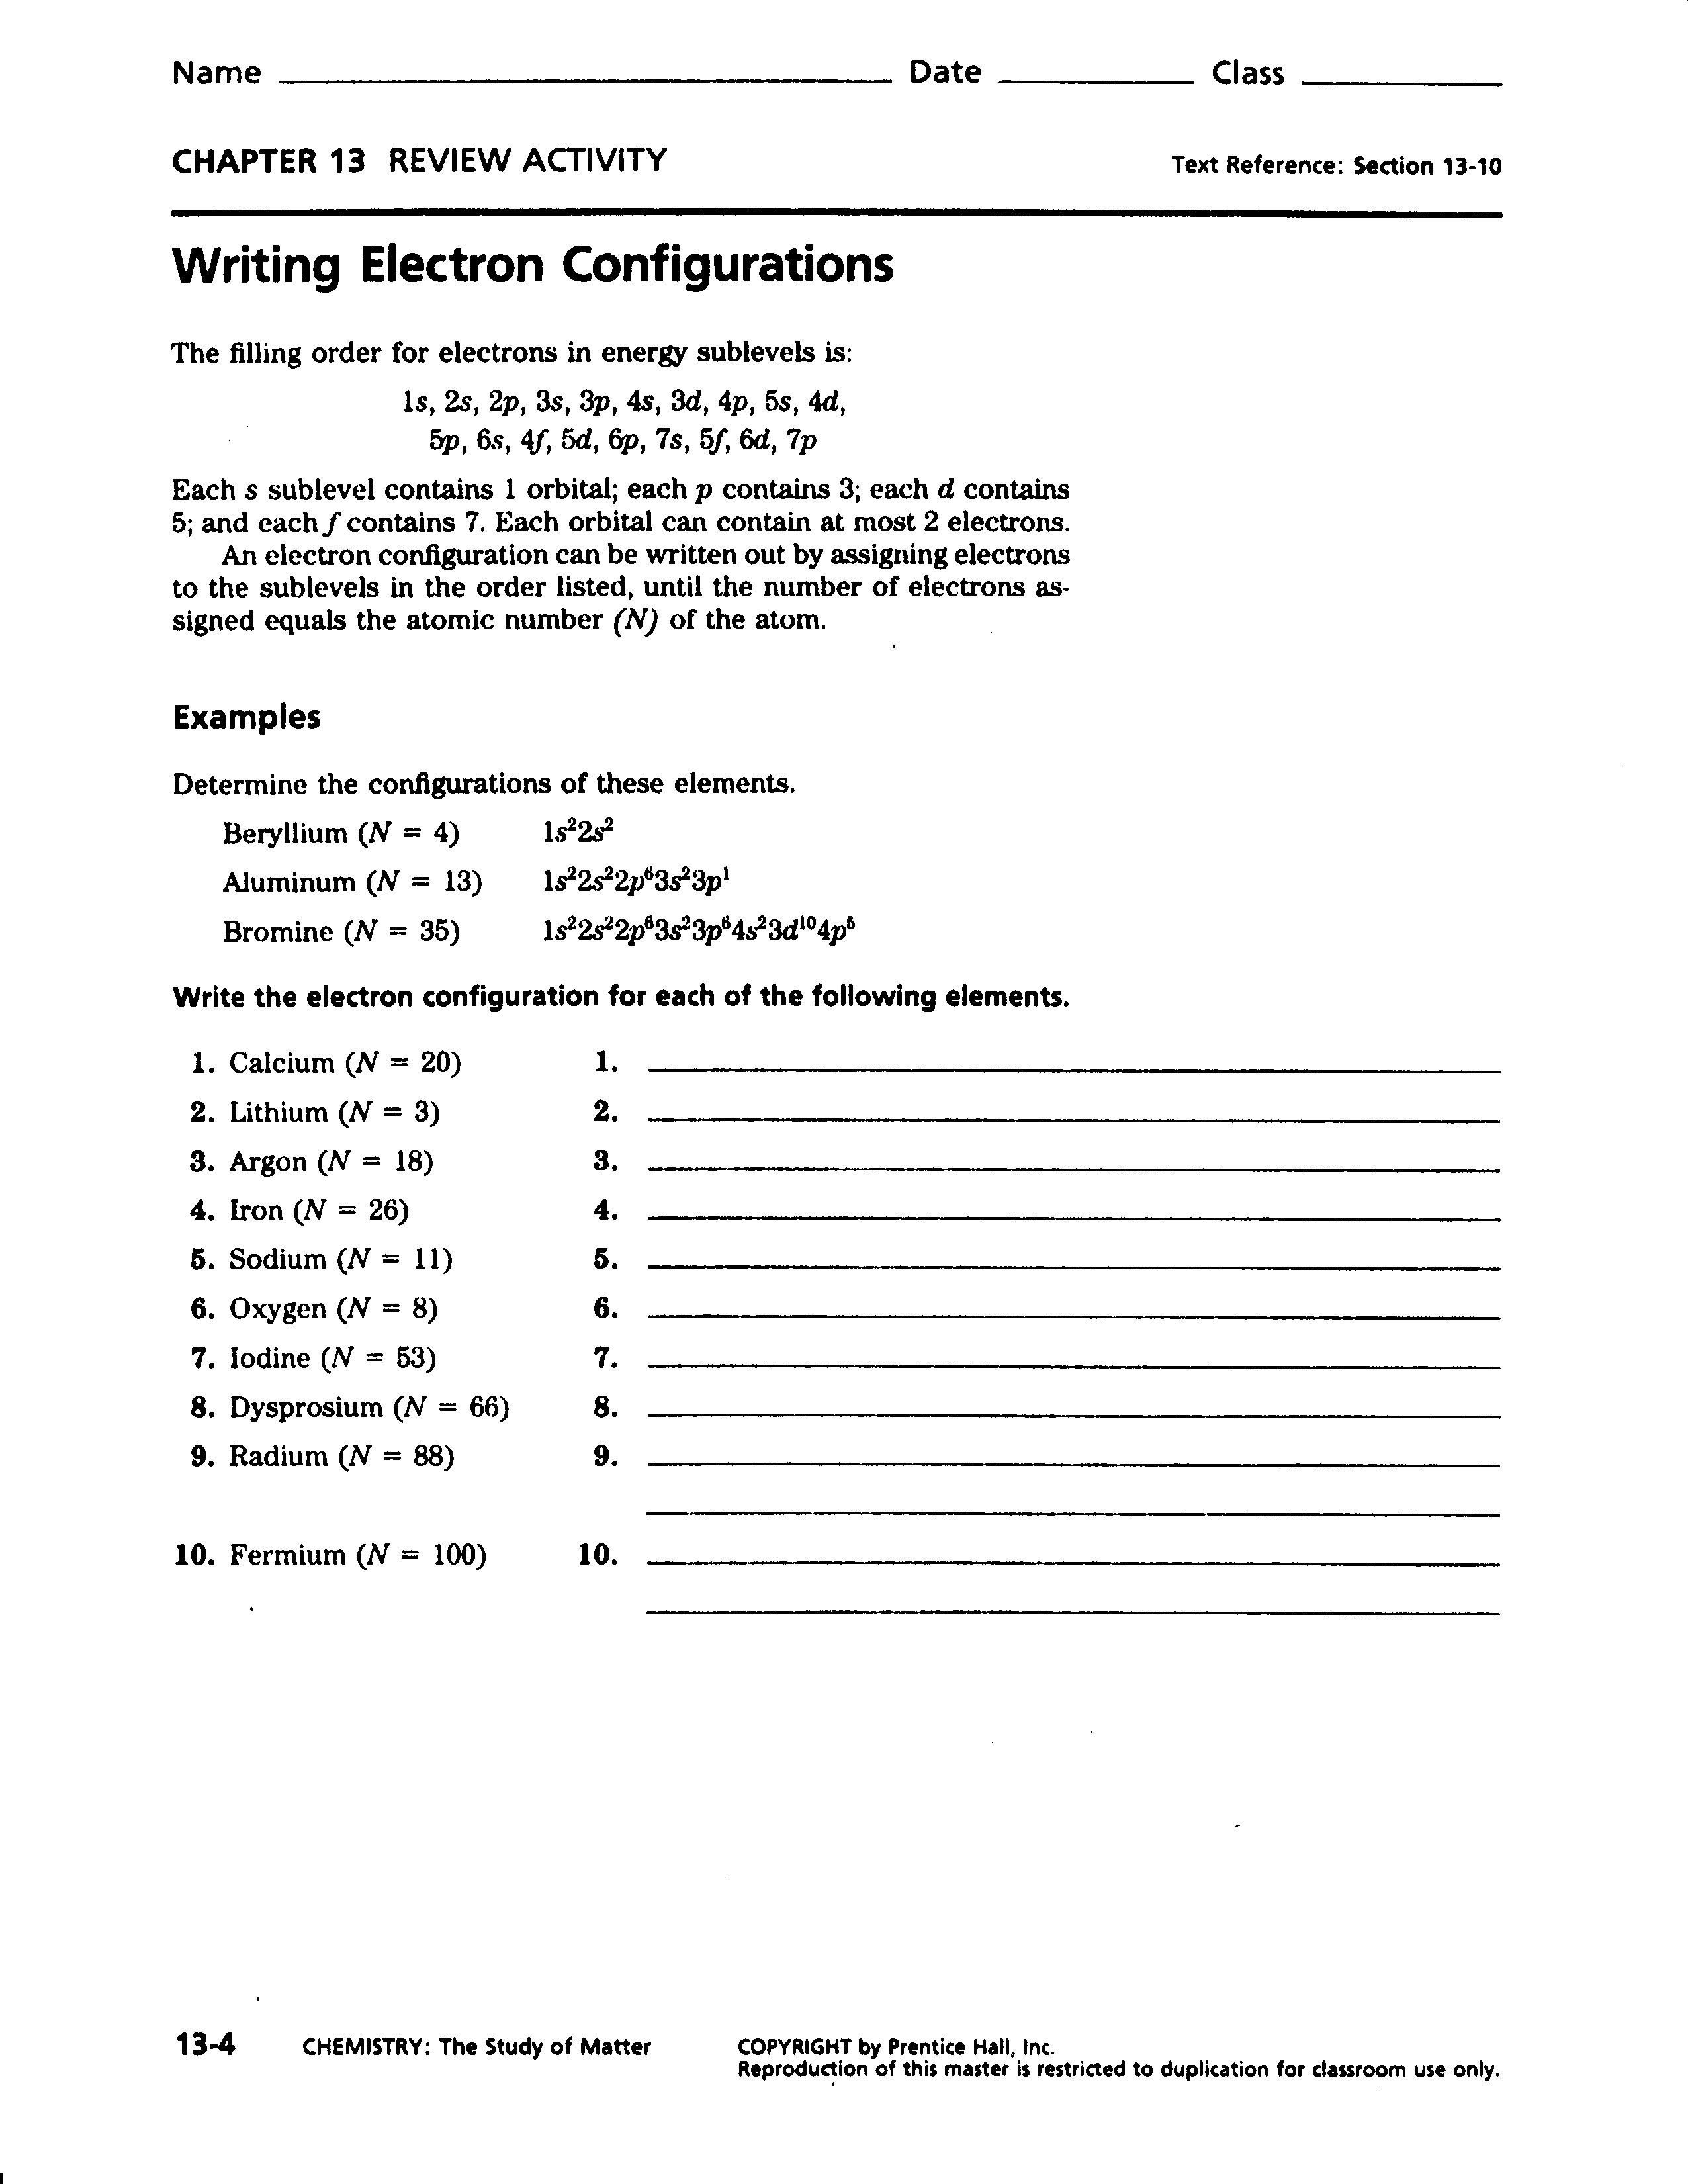 Calculating Average Atomic Mass Worksheet Answers Best Of Electron